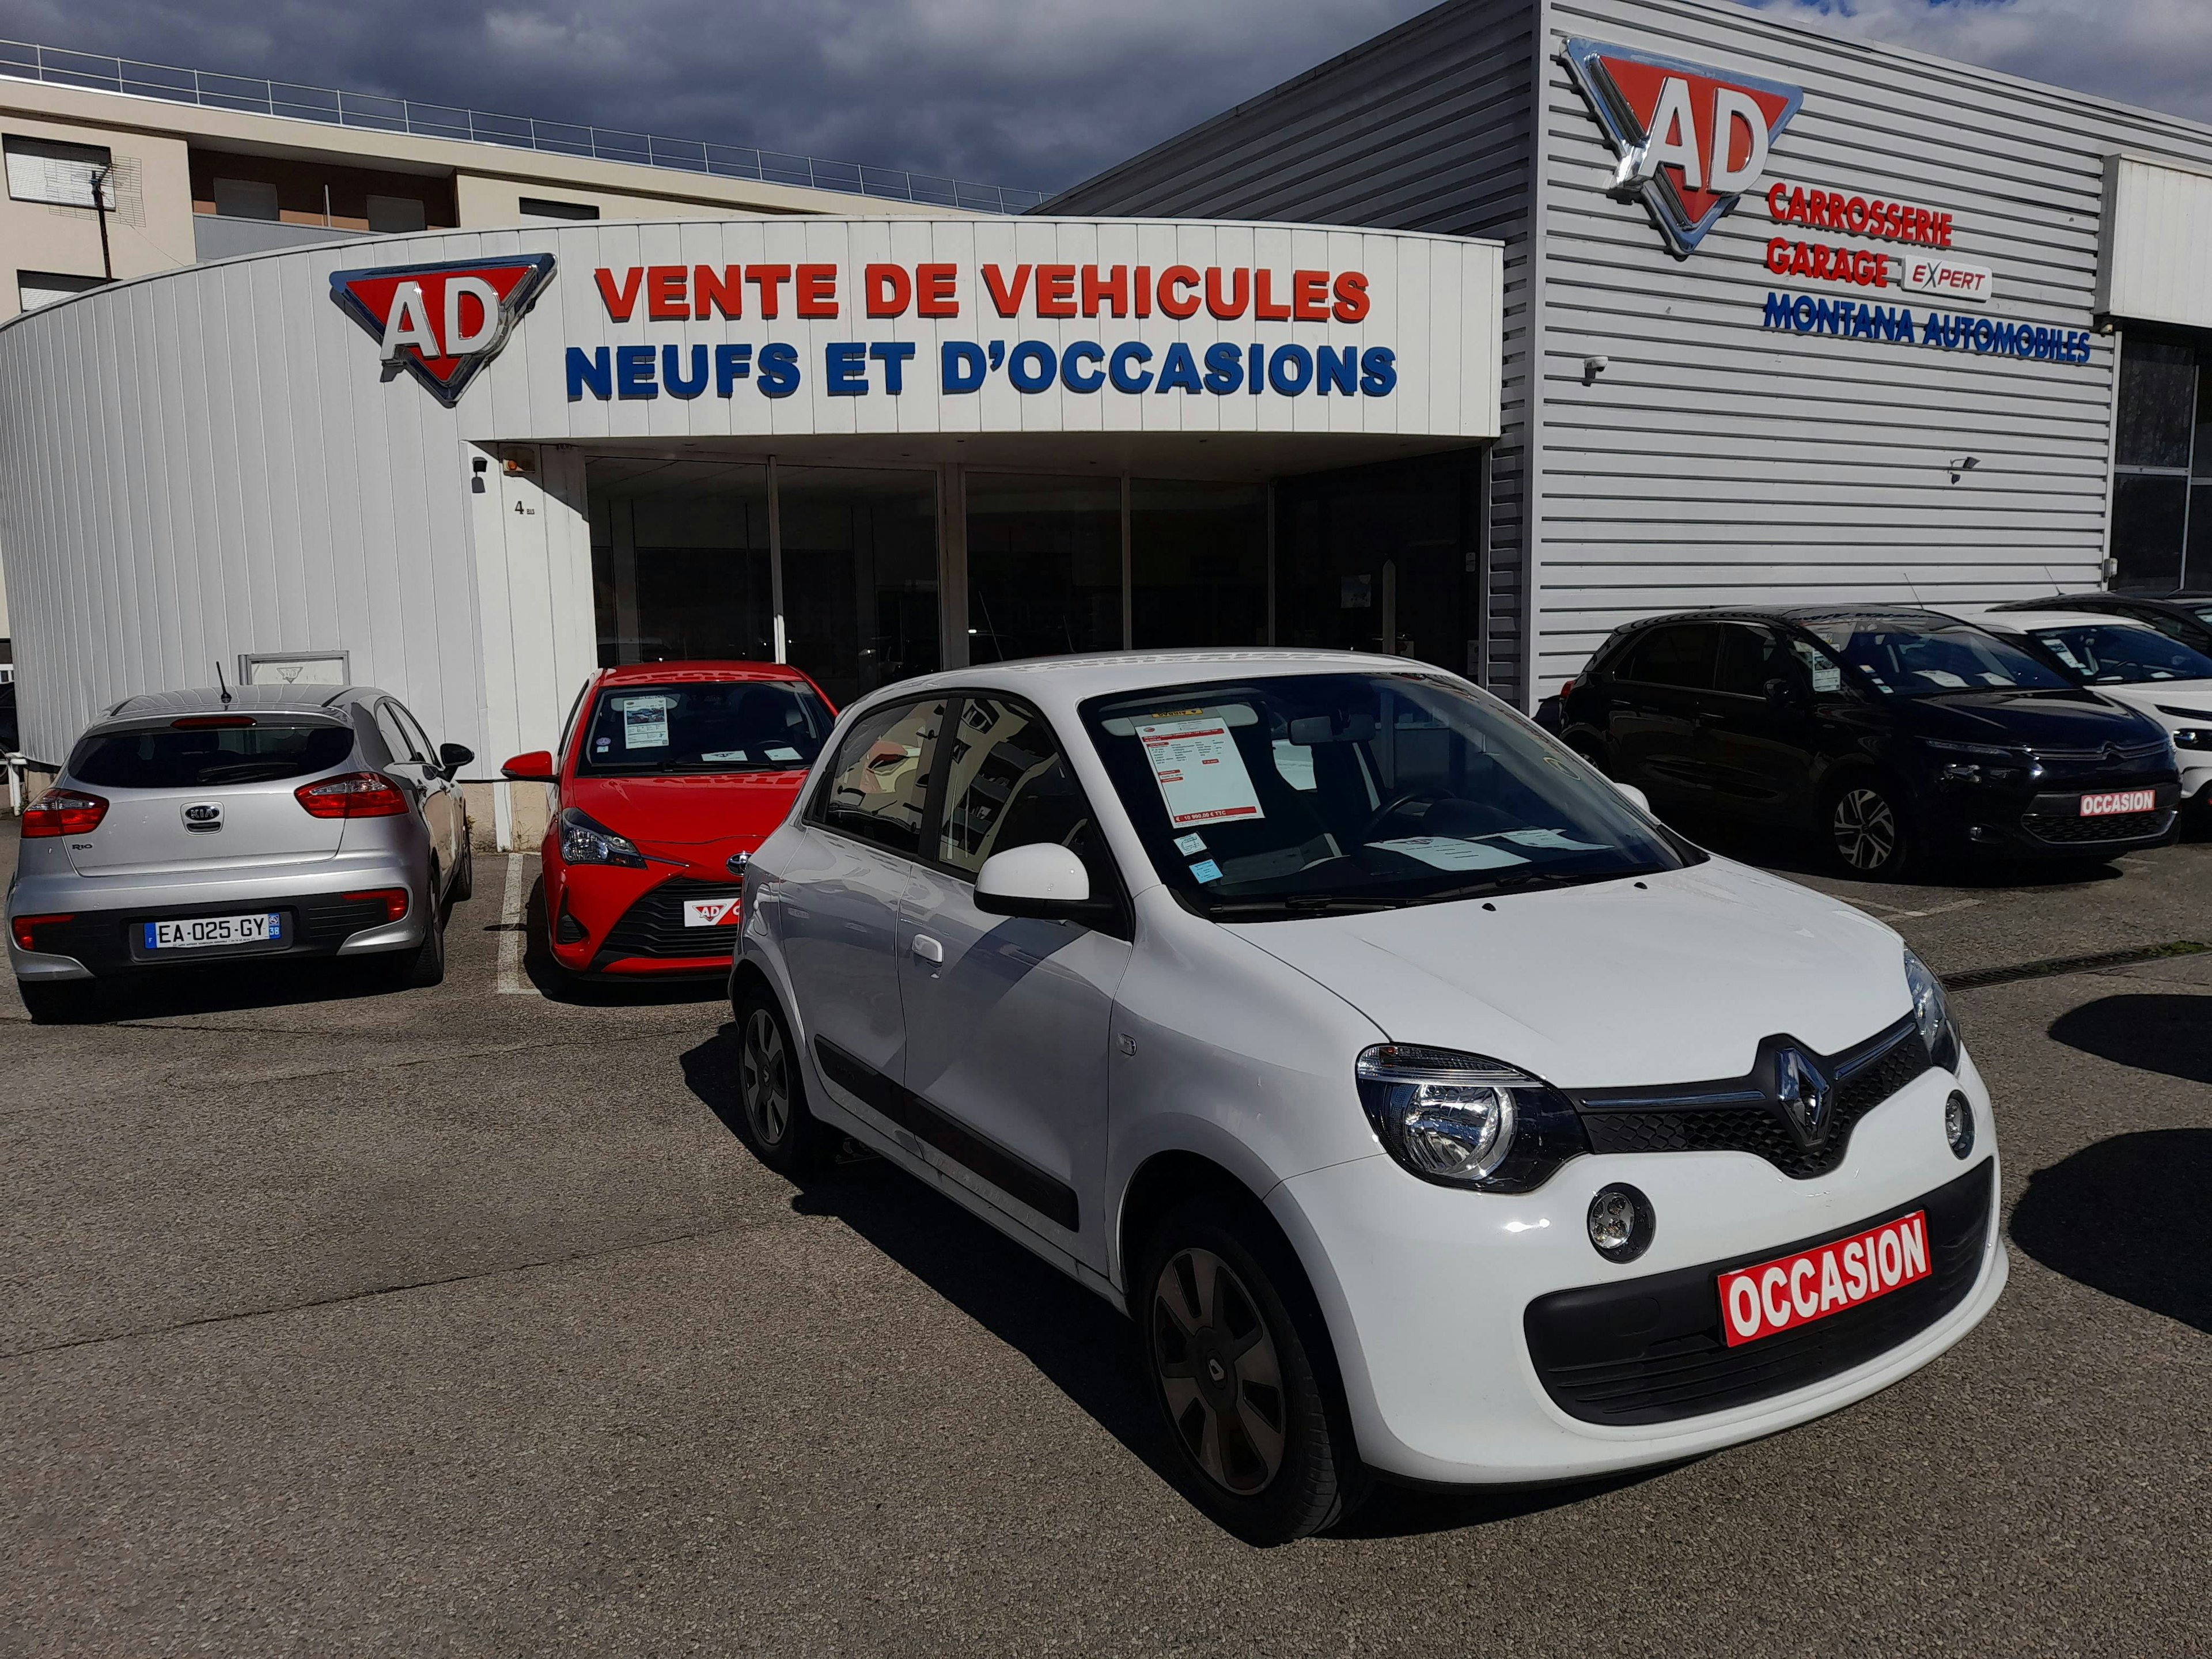 Renault Twingo 0.9i - 12V TURBO TCE 90 Intens occasion